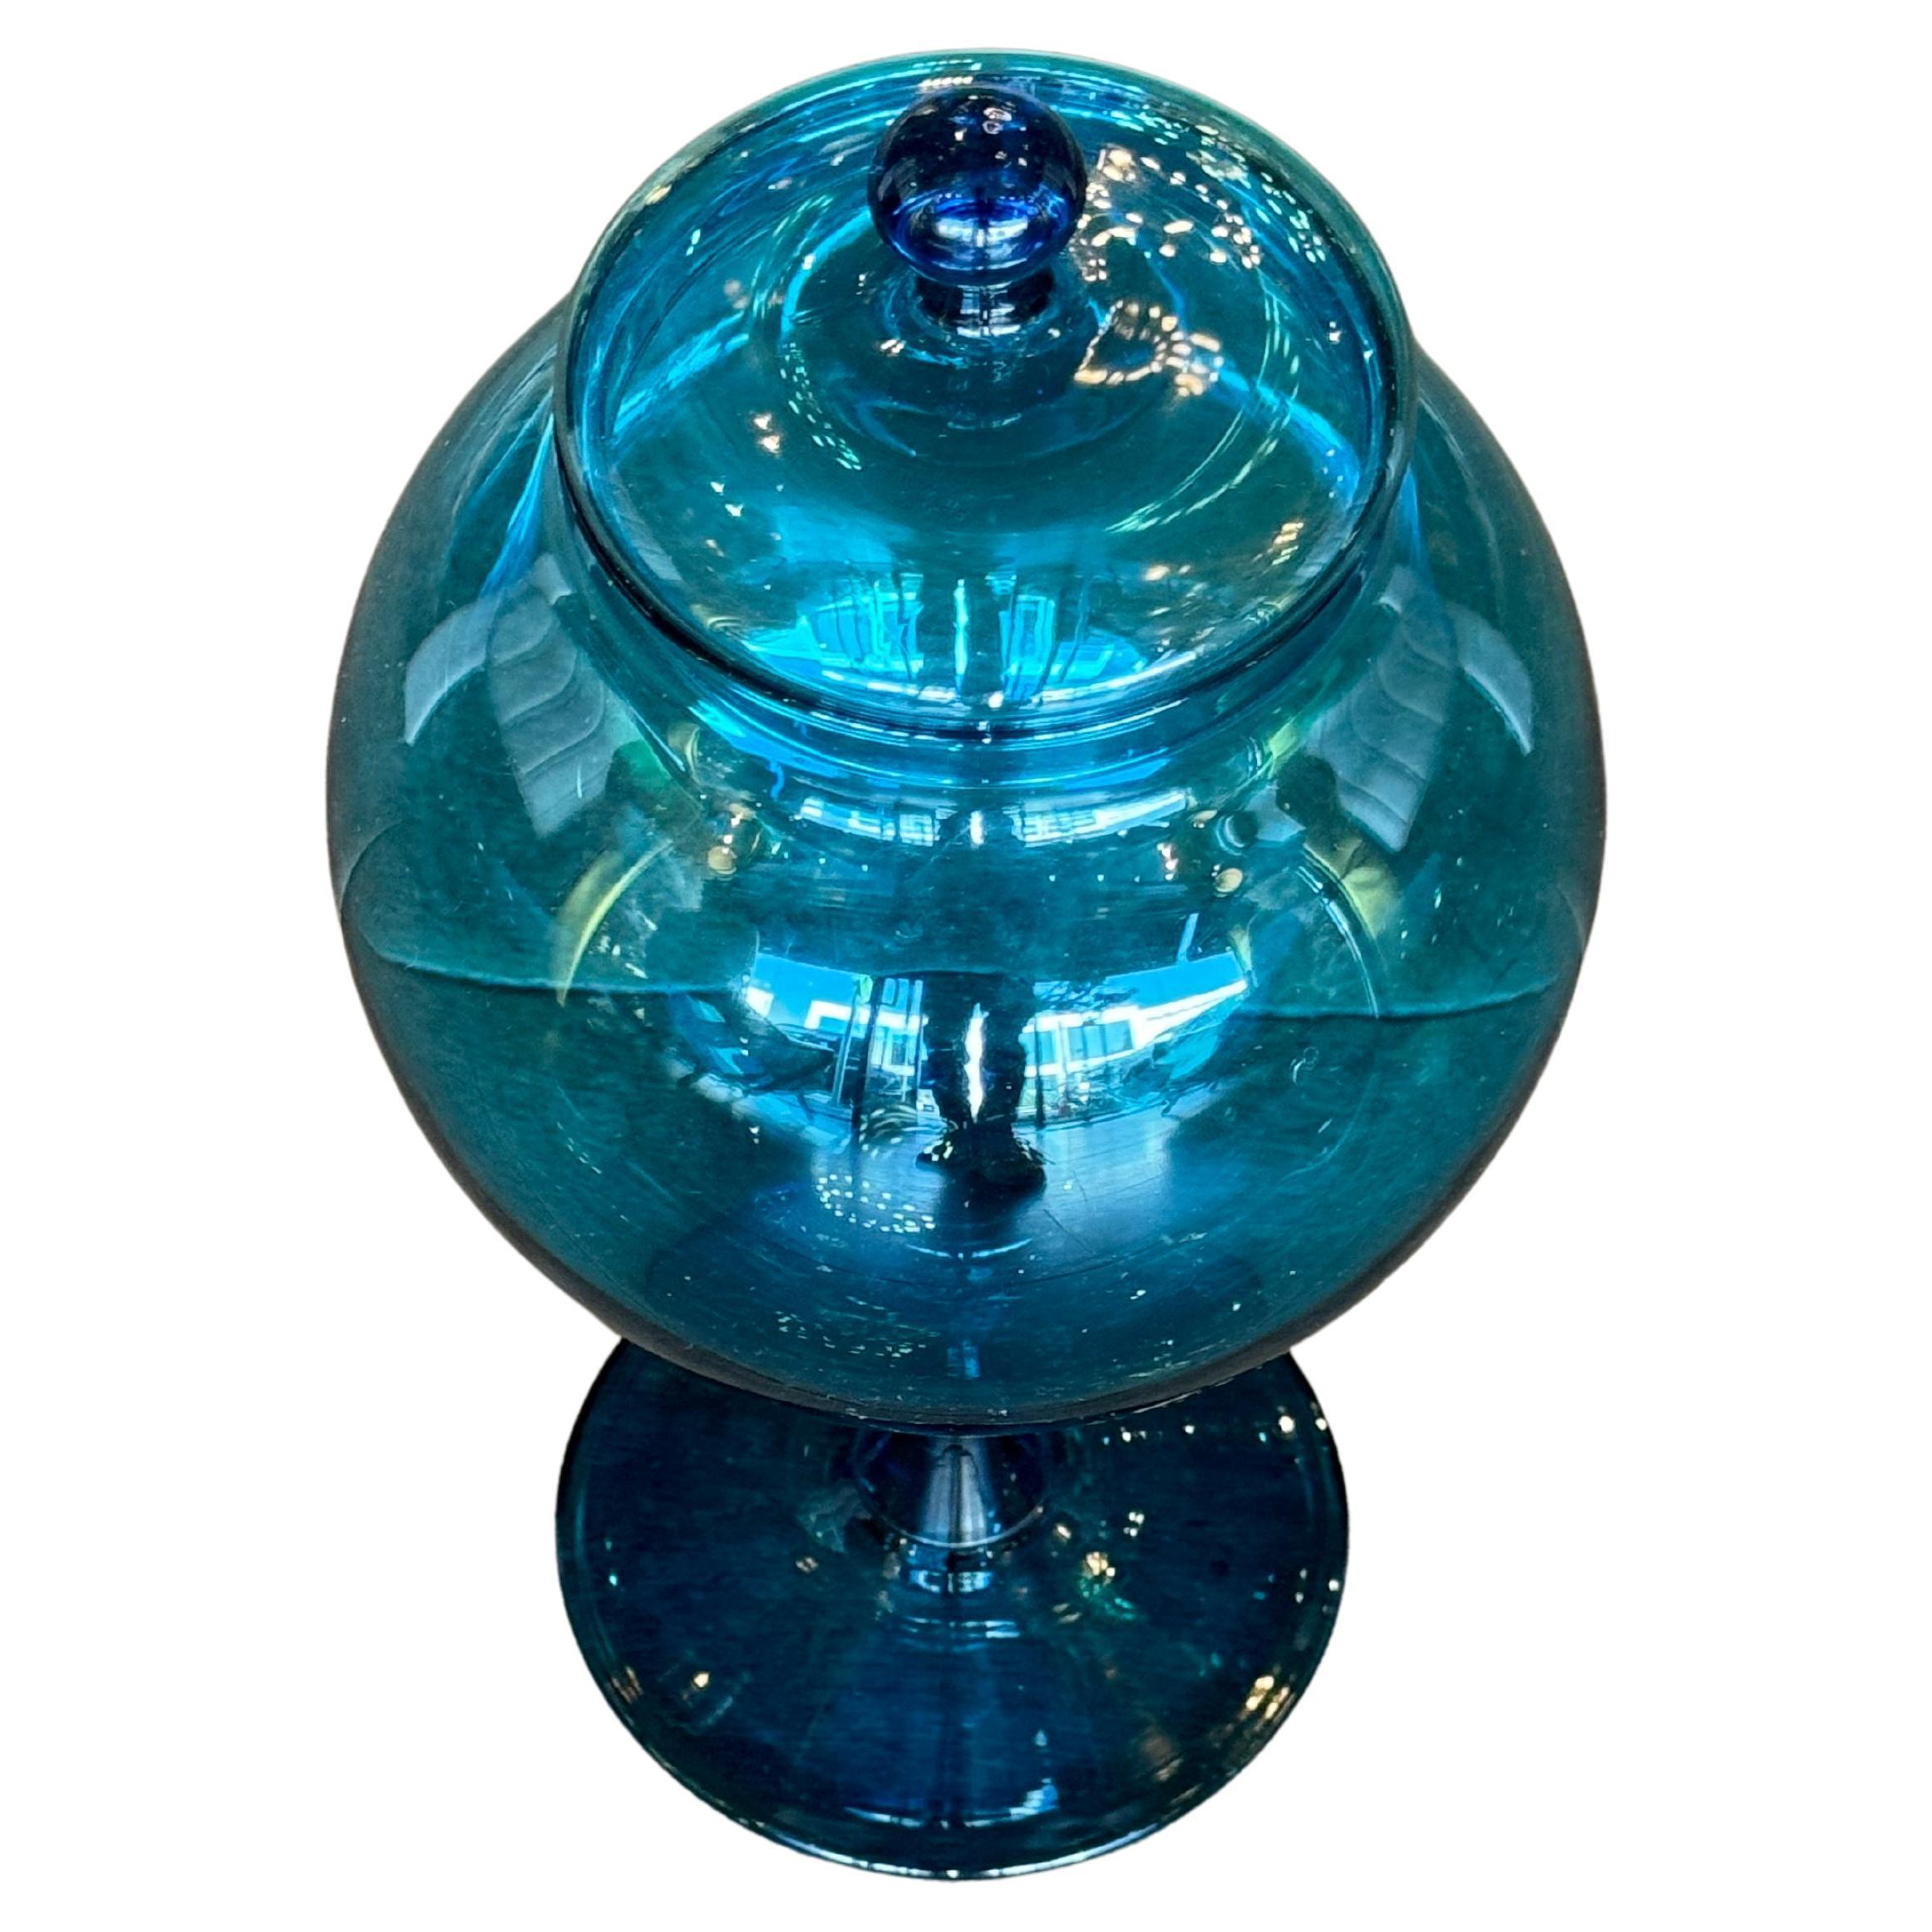 Handblown Murano Glass Globe, and Container
Sourced from Jaipur by Martyn Lawrence Bullard